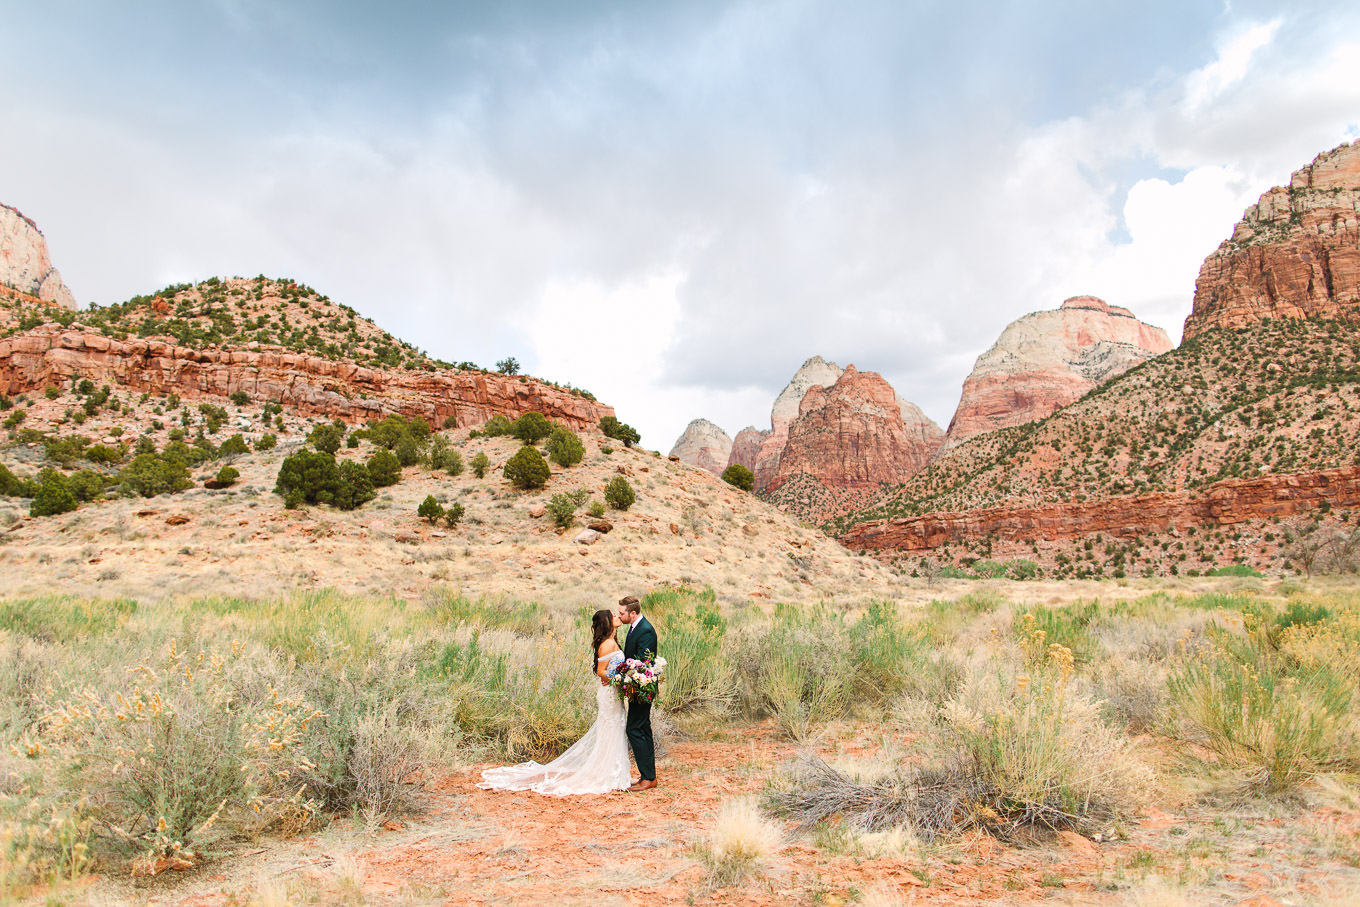 Groom in green suit with bride in Zion National Park | Zion National Park elopement | Colorful adventure elopement photography | #utahelopement #zionelopement #zionwedding #undercanvaszion   Source: Mary Costa Photography | Los Angeles